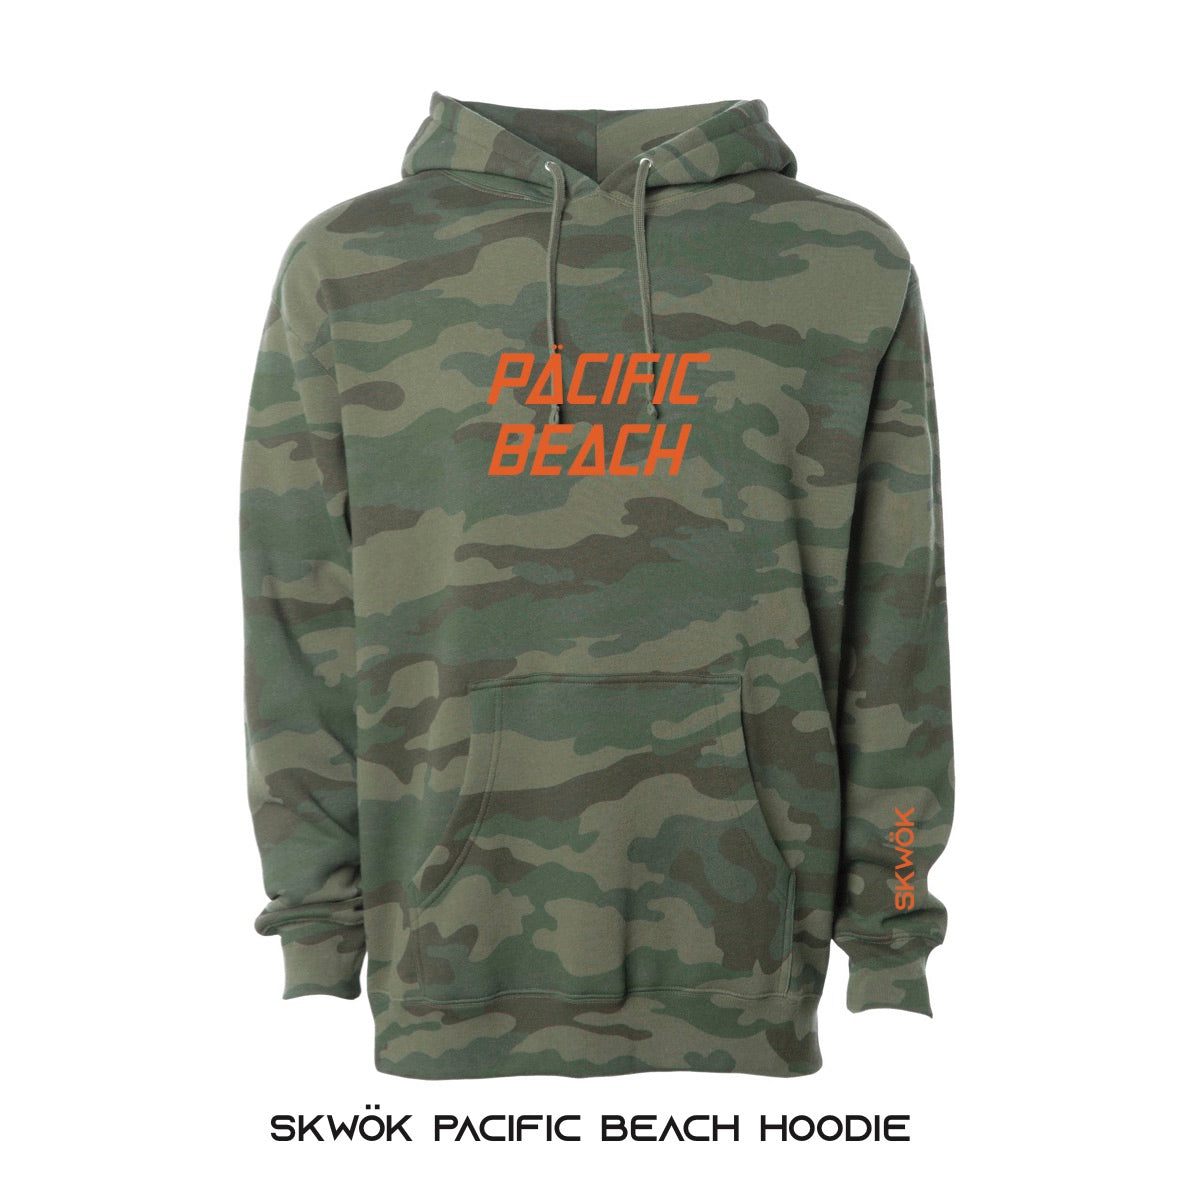 Skwok Pacific Beach Hoodie - Camouflage - 10oz - (6 Color Options)